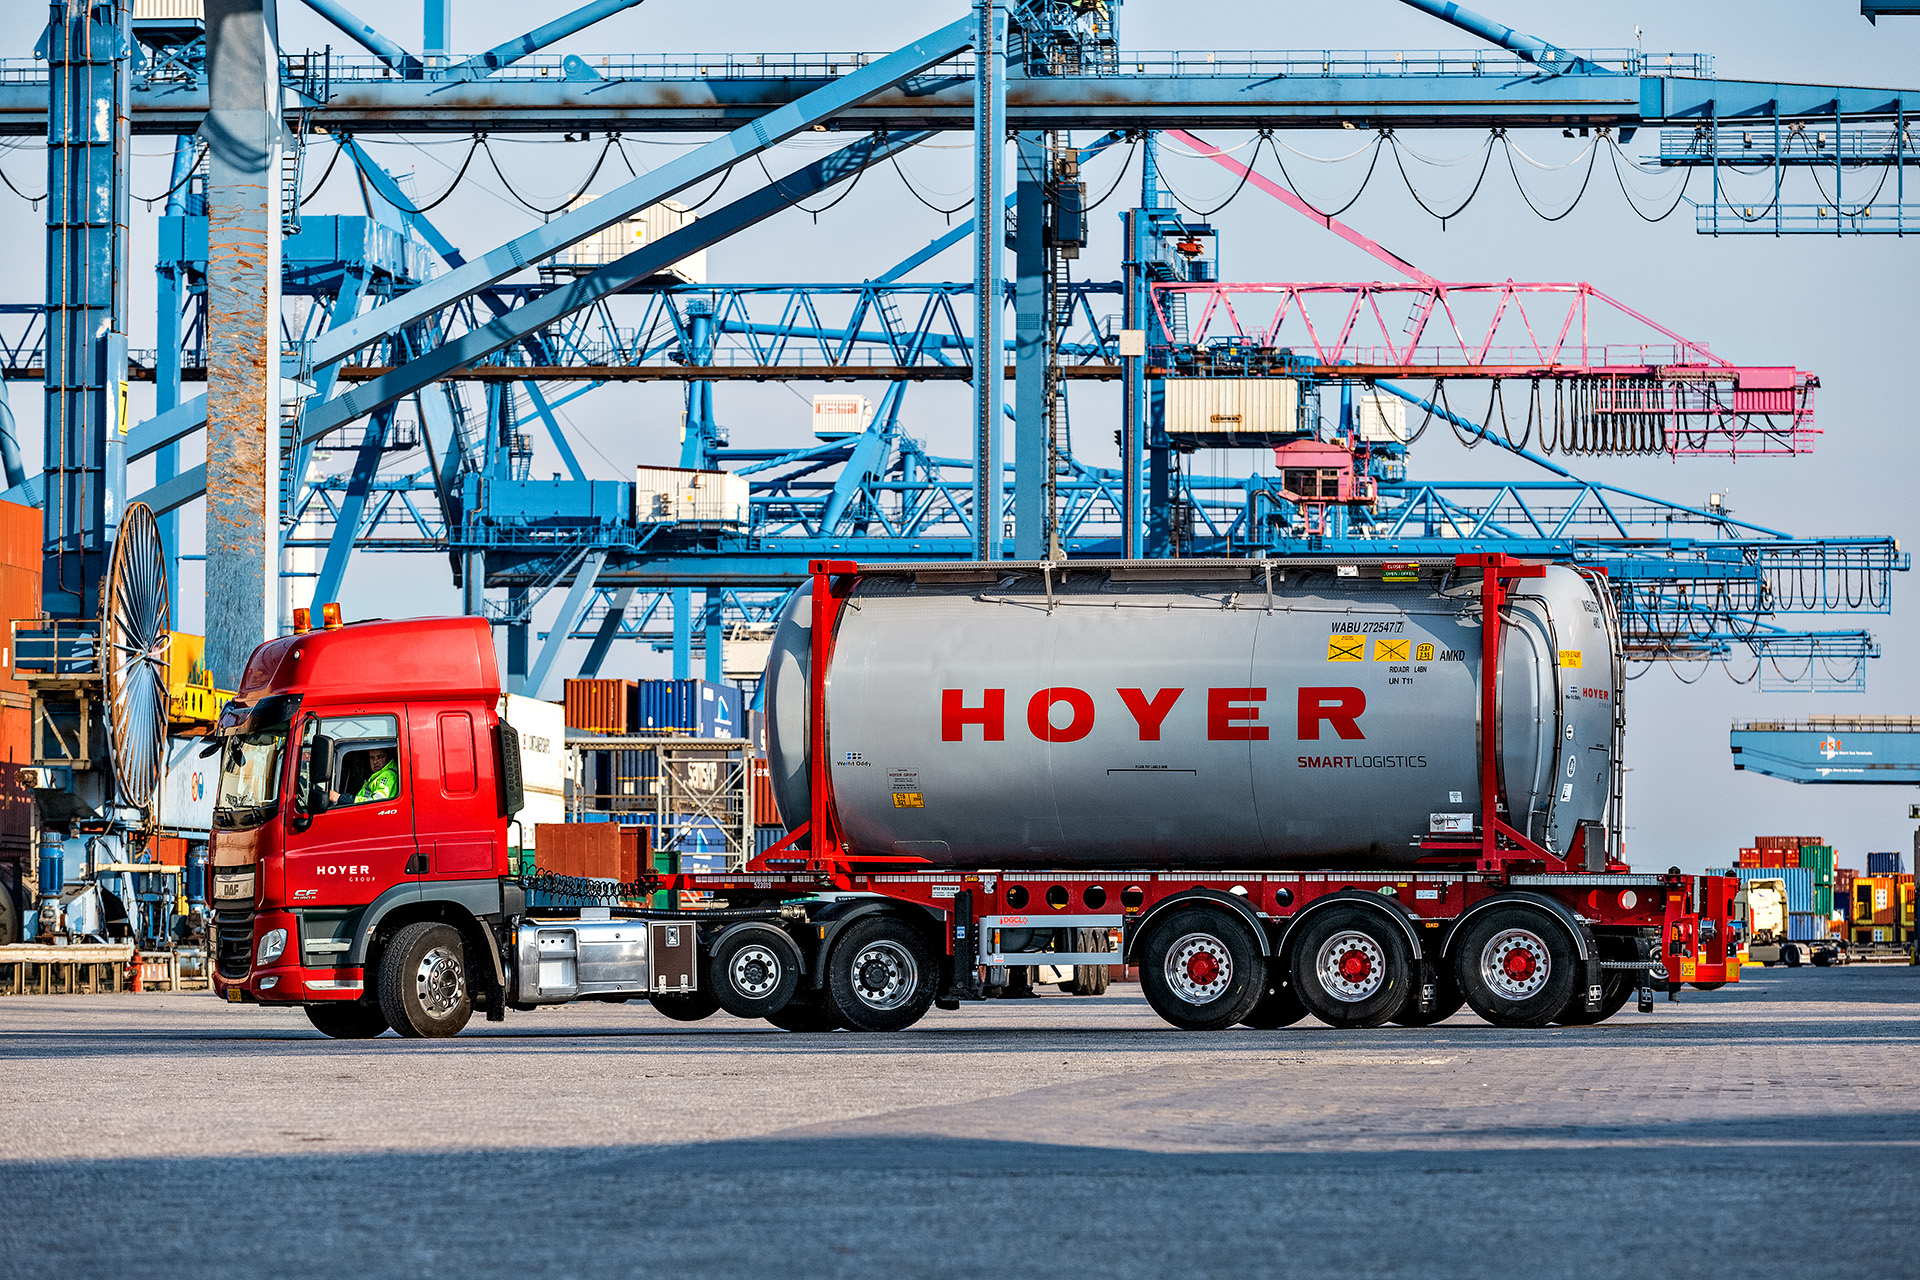 HOYER truck with chemicals tank container in Rotterdam